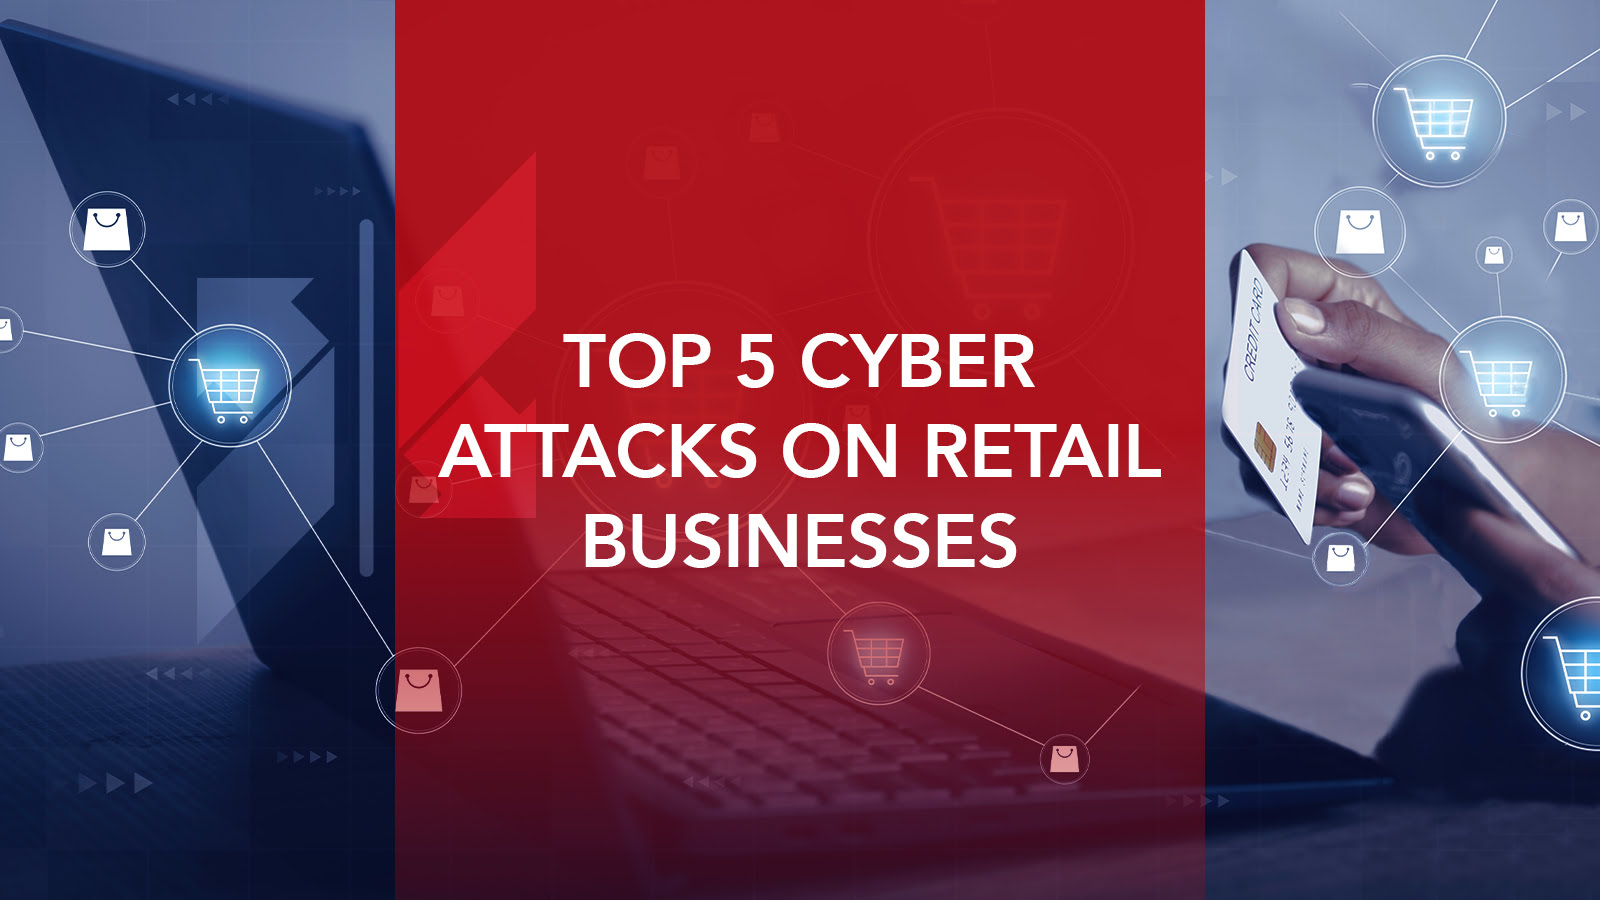 Top 5 cyber attacks on retail businesses